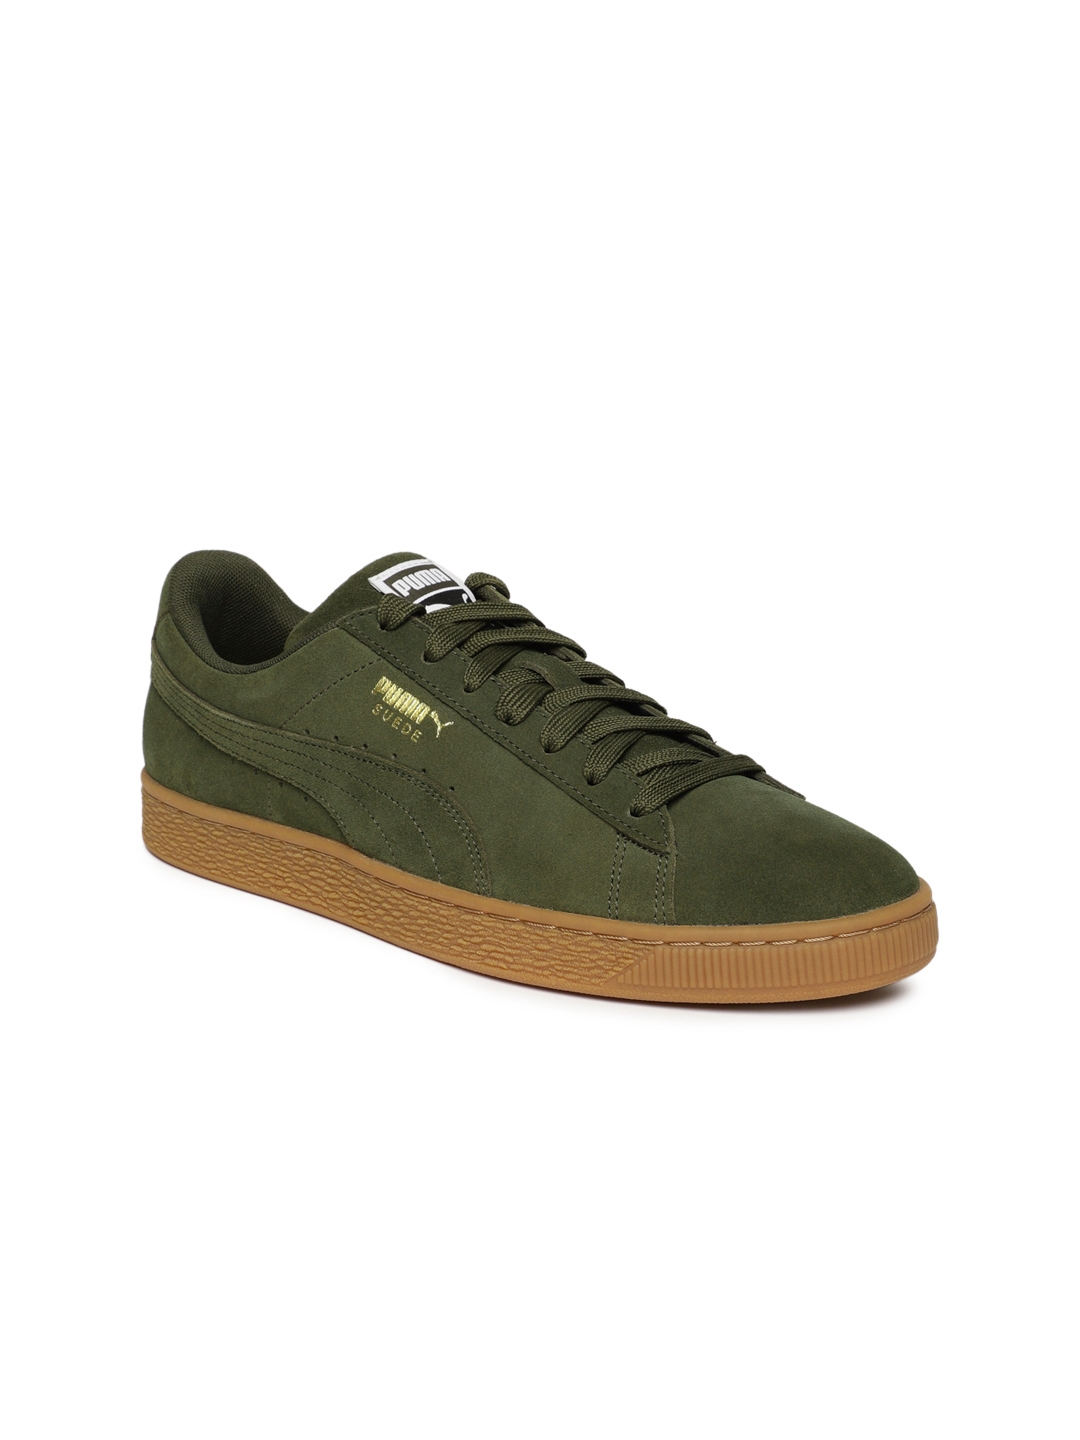 puma sneakers olive green